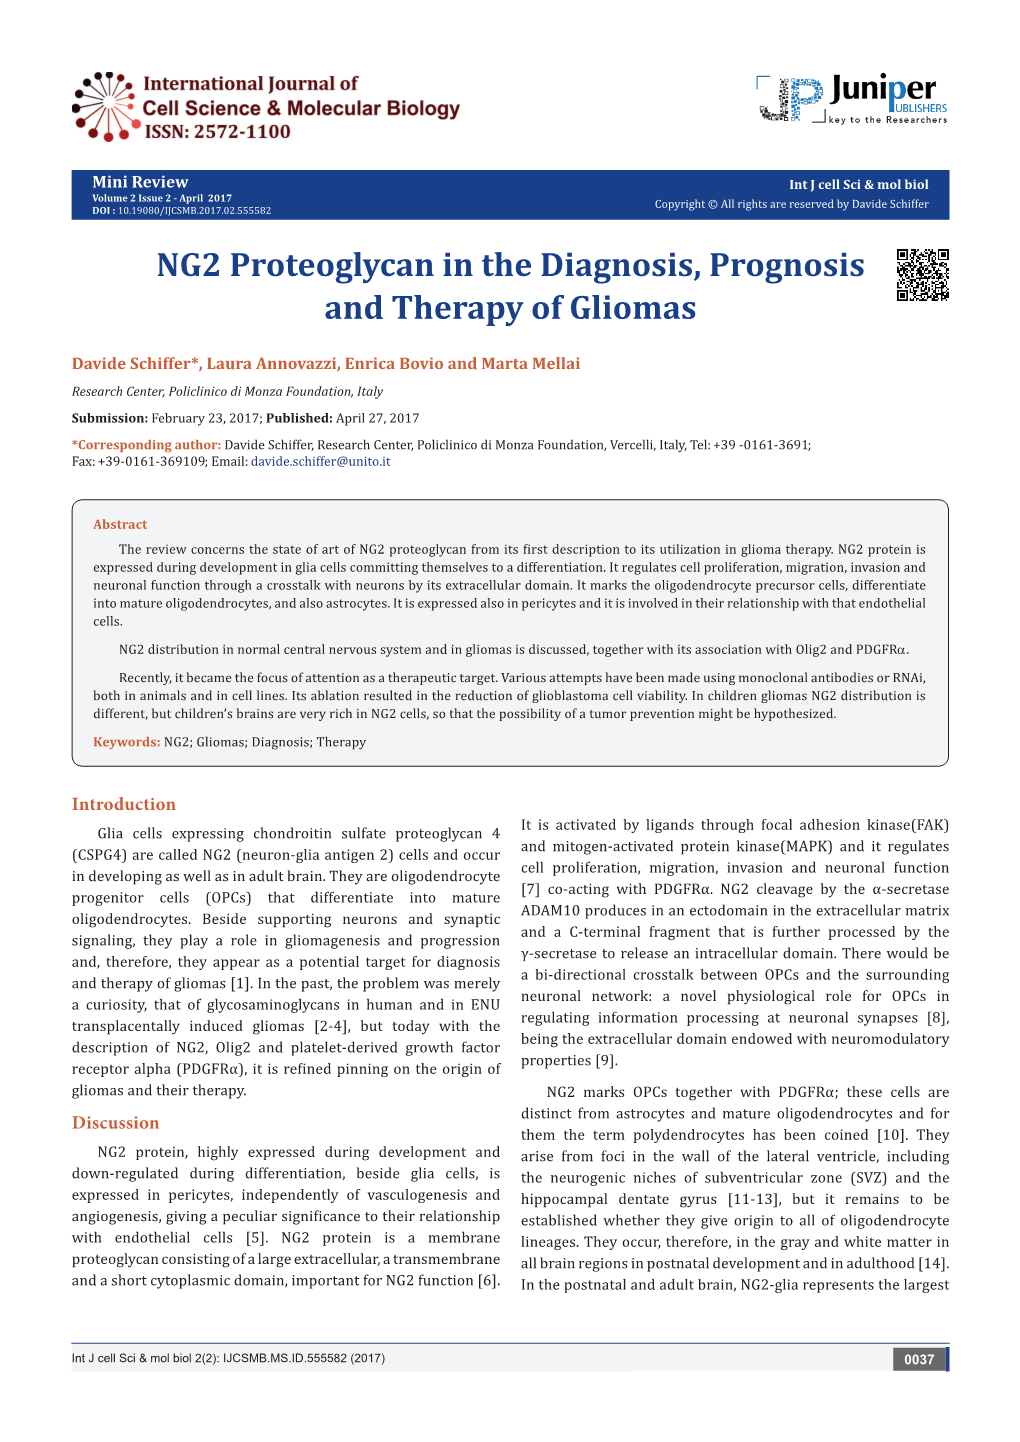 NG2 Proteoglycan in the Diagnosis, Prognosis and Therapy of Gliomas